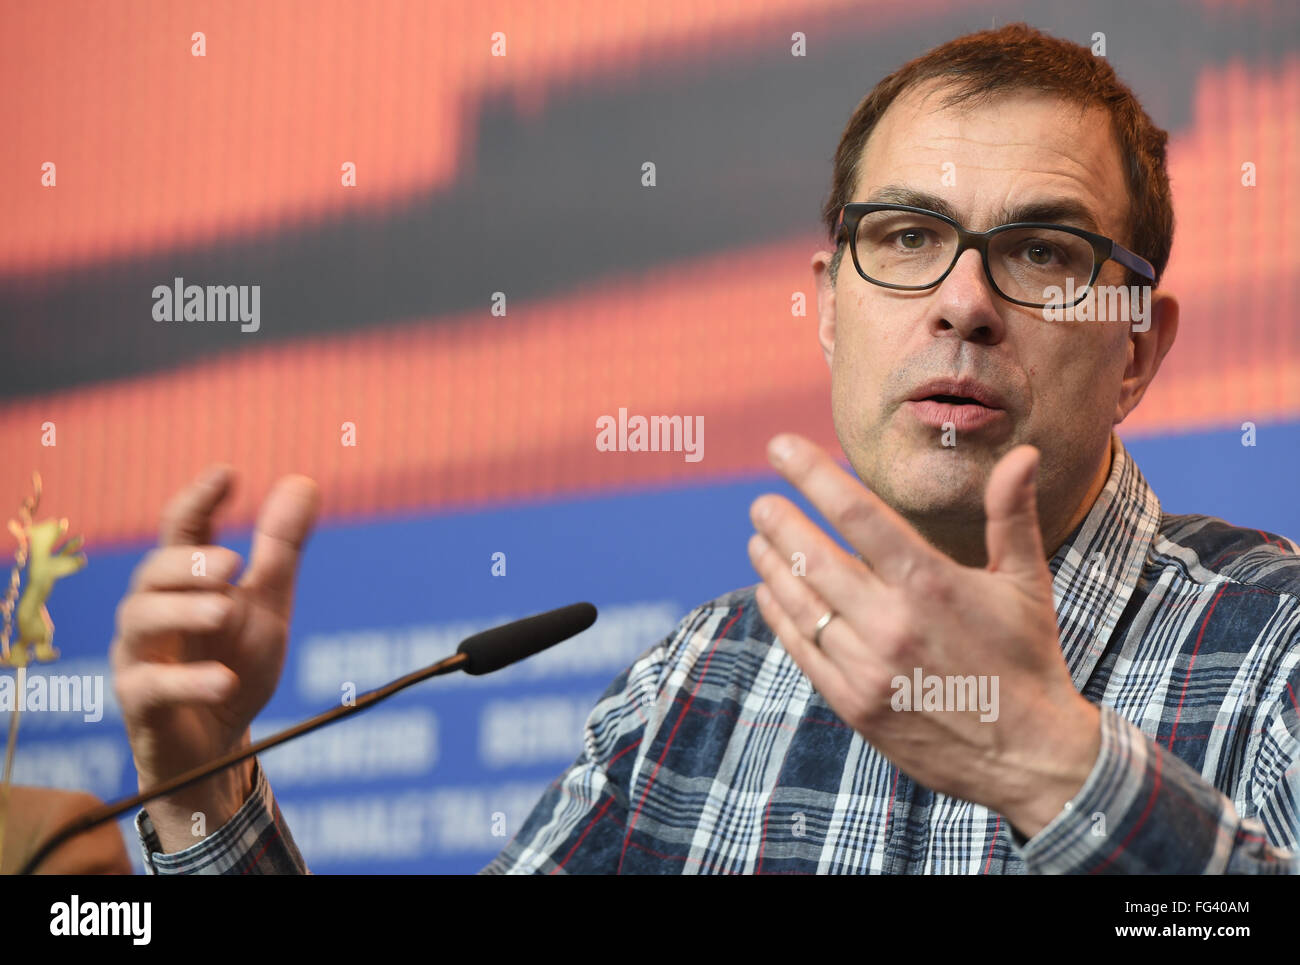 Berlin, Germany. 17th Feb, 2016. 66th International Film Festival in Berlin, Germany, 17 February 2016. Press conference 'Des nouvelles de la planete Mars' ('News from planet Mars': Director Dominik Moll. The film is shown in the Berlinale Competition (Out of Competition). The Berlinale runs from 11 February to 21 February 2016. Photo: Jens Kalaene/dpa/Alamy Live News Stock Photo